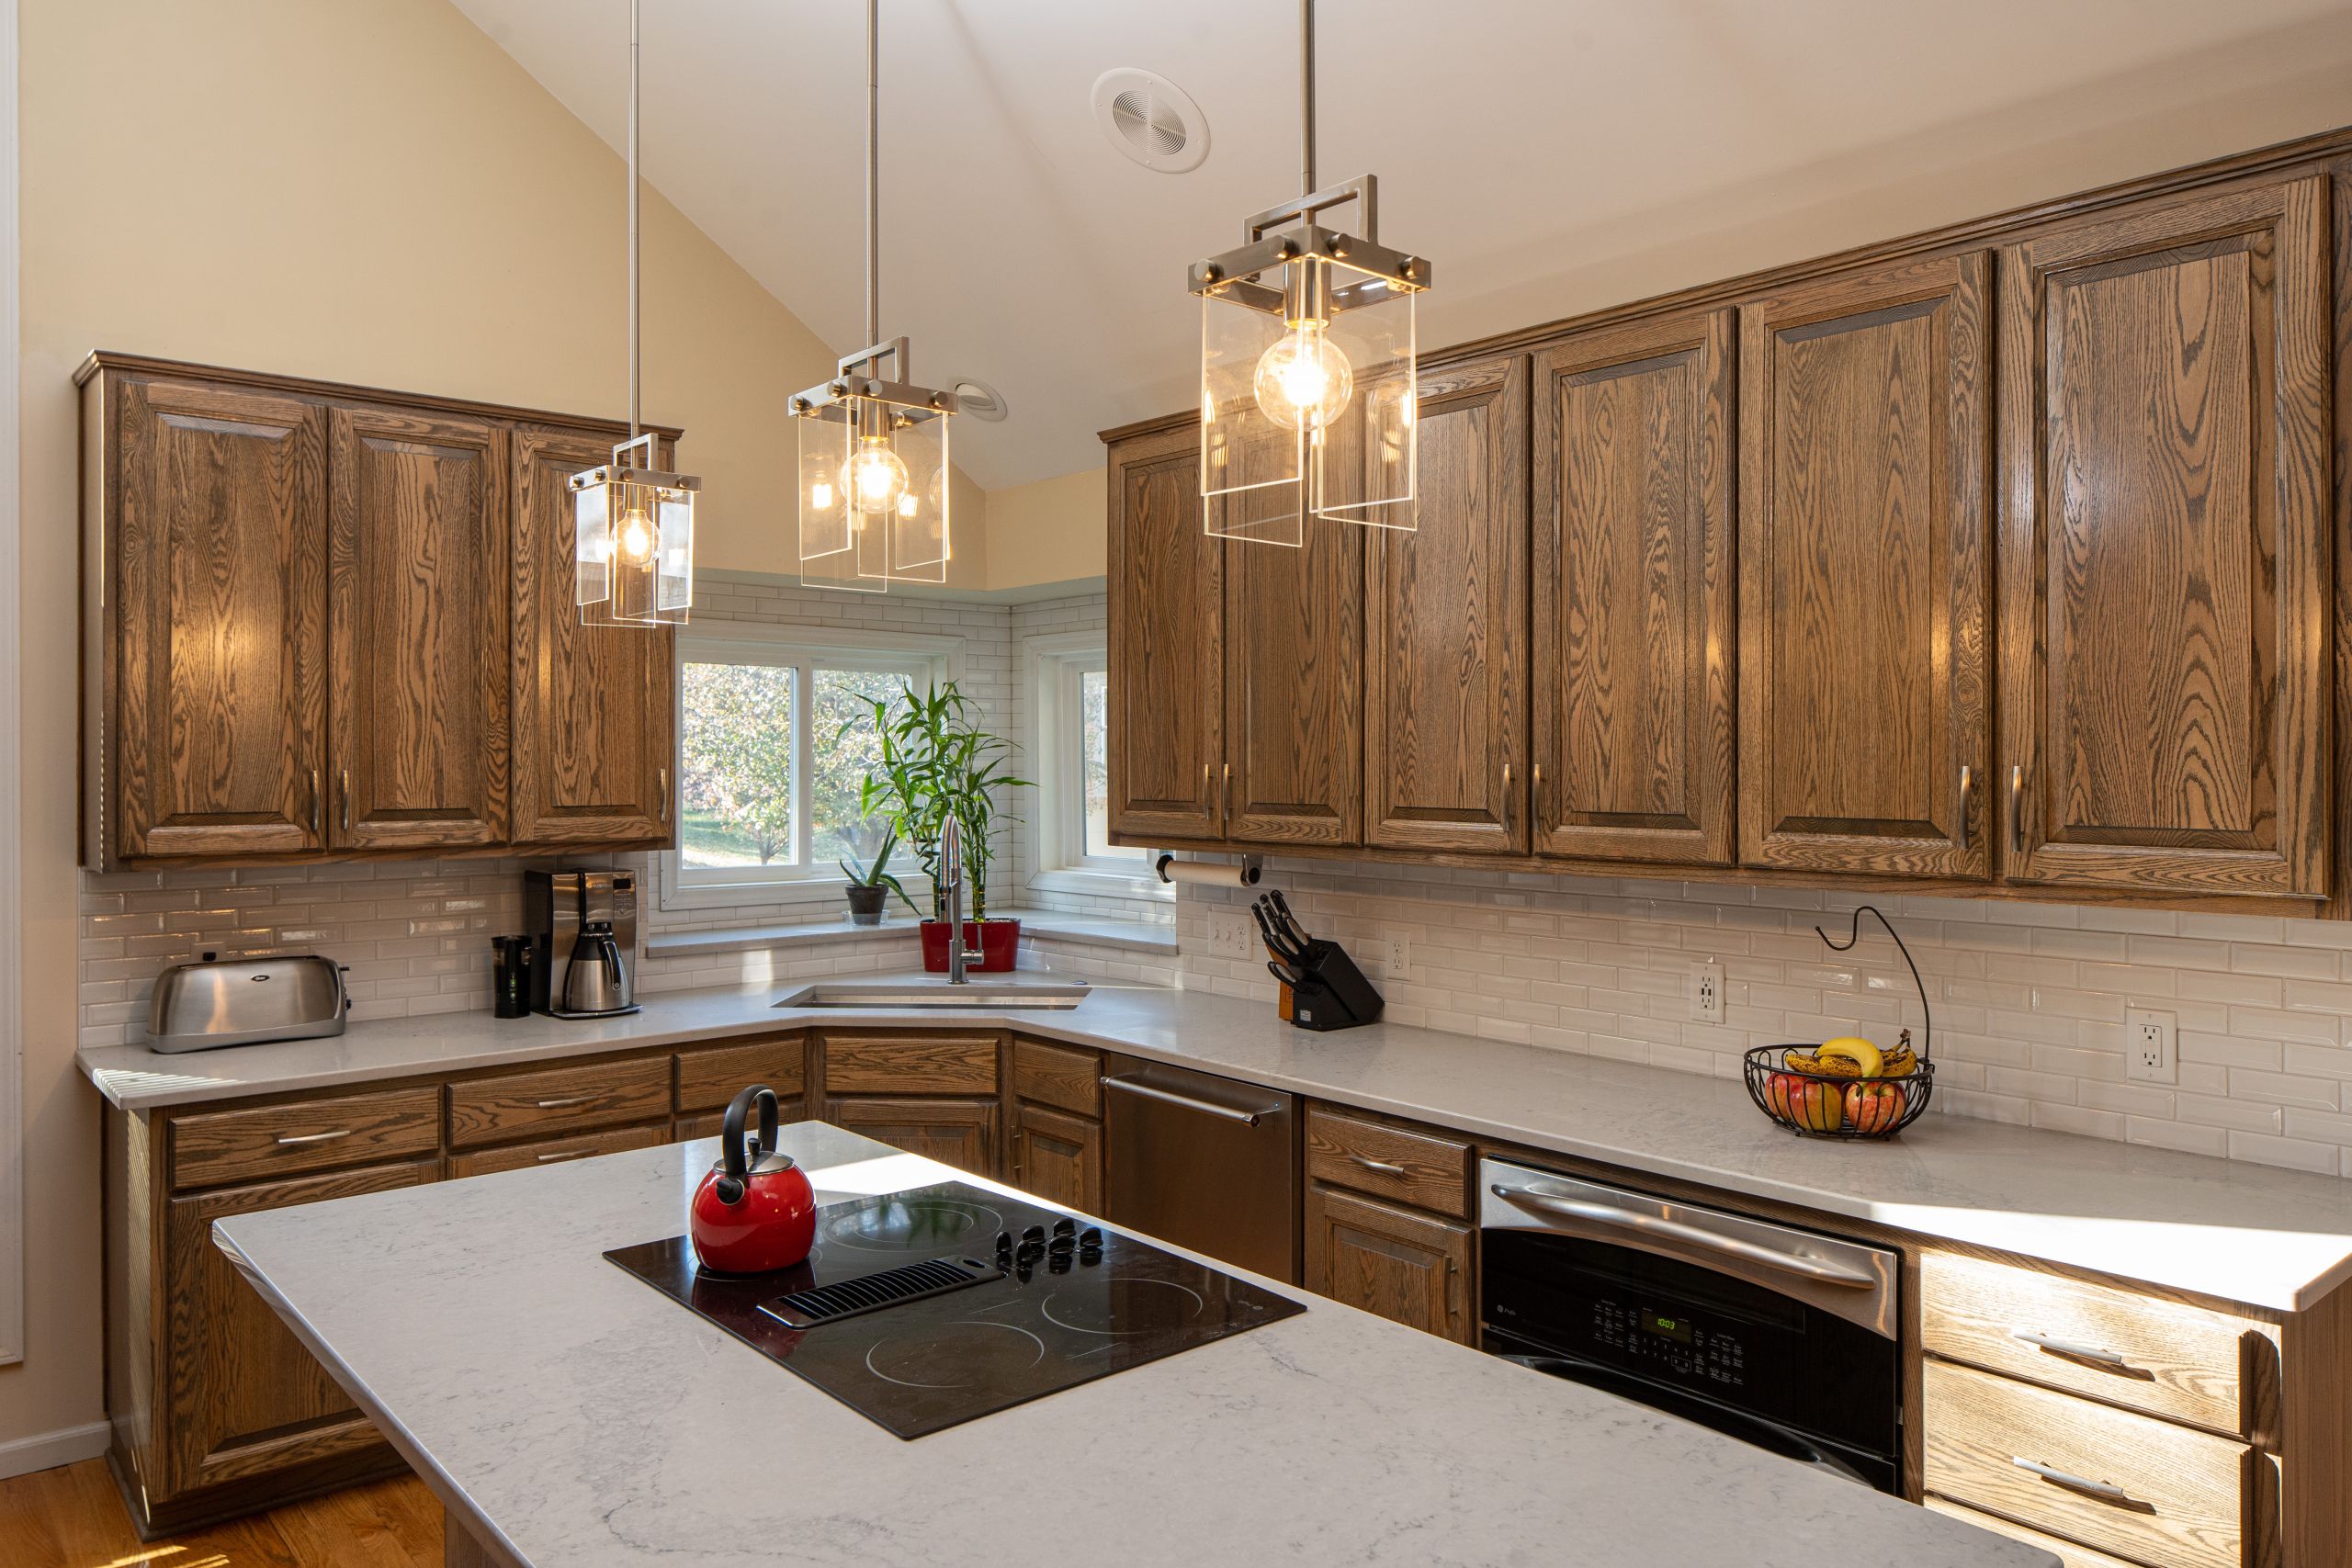 Kitchen Remodels With Oak Cabinets
 A Kitchen Remodel with Refinished Golden Oak Cabinets